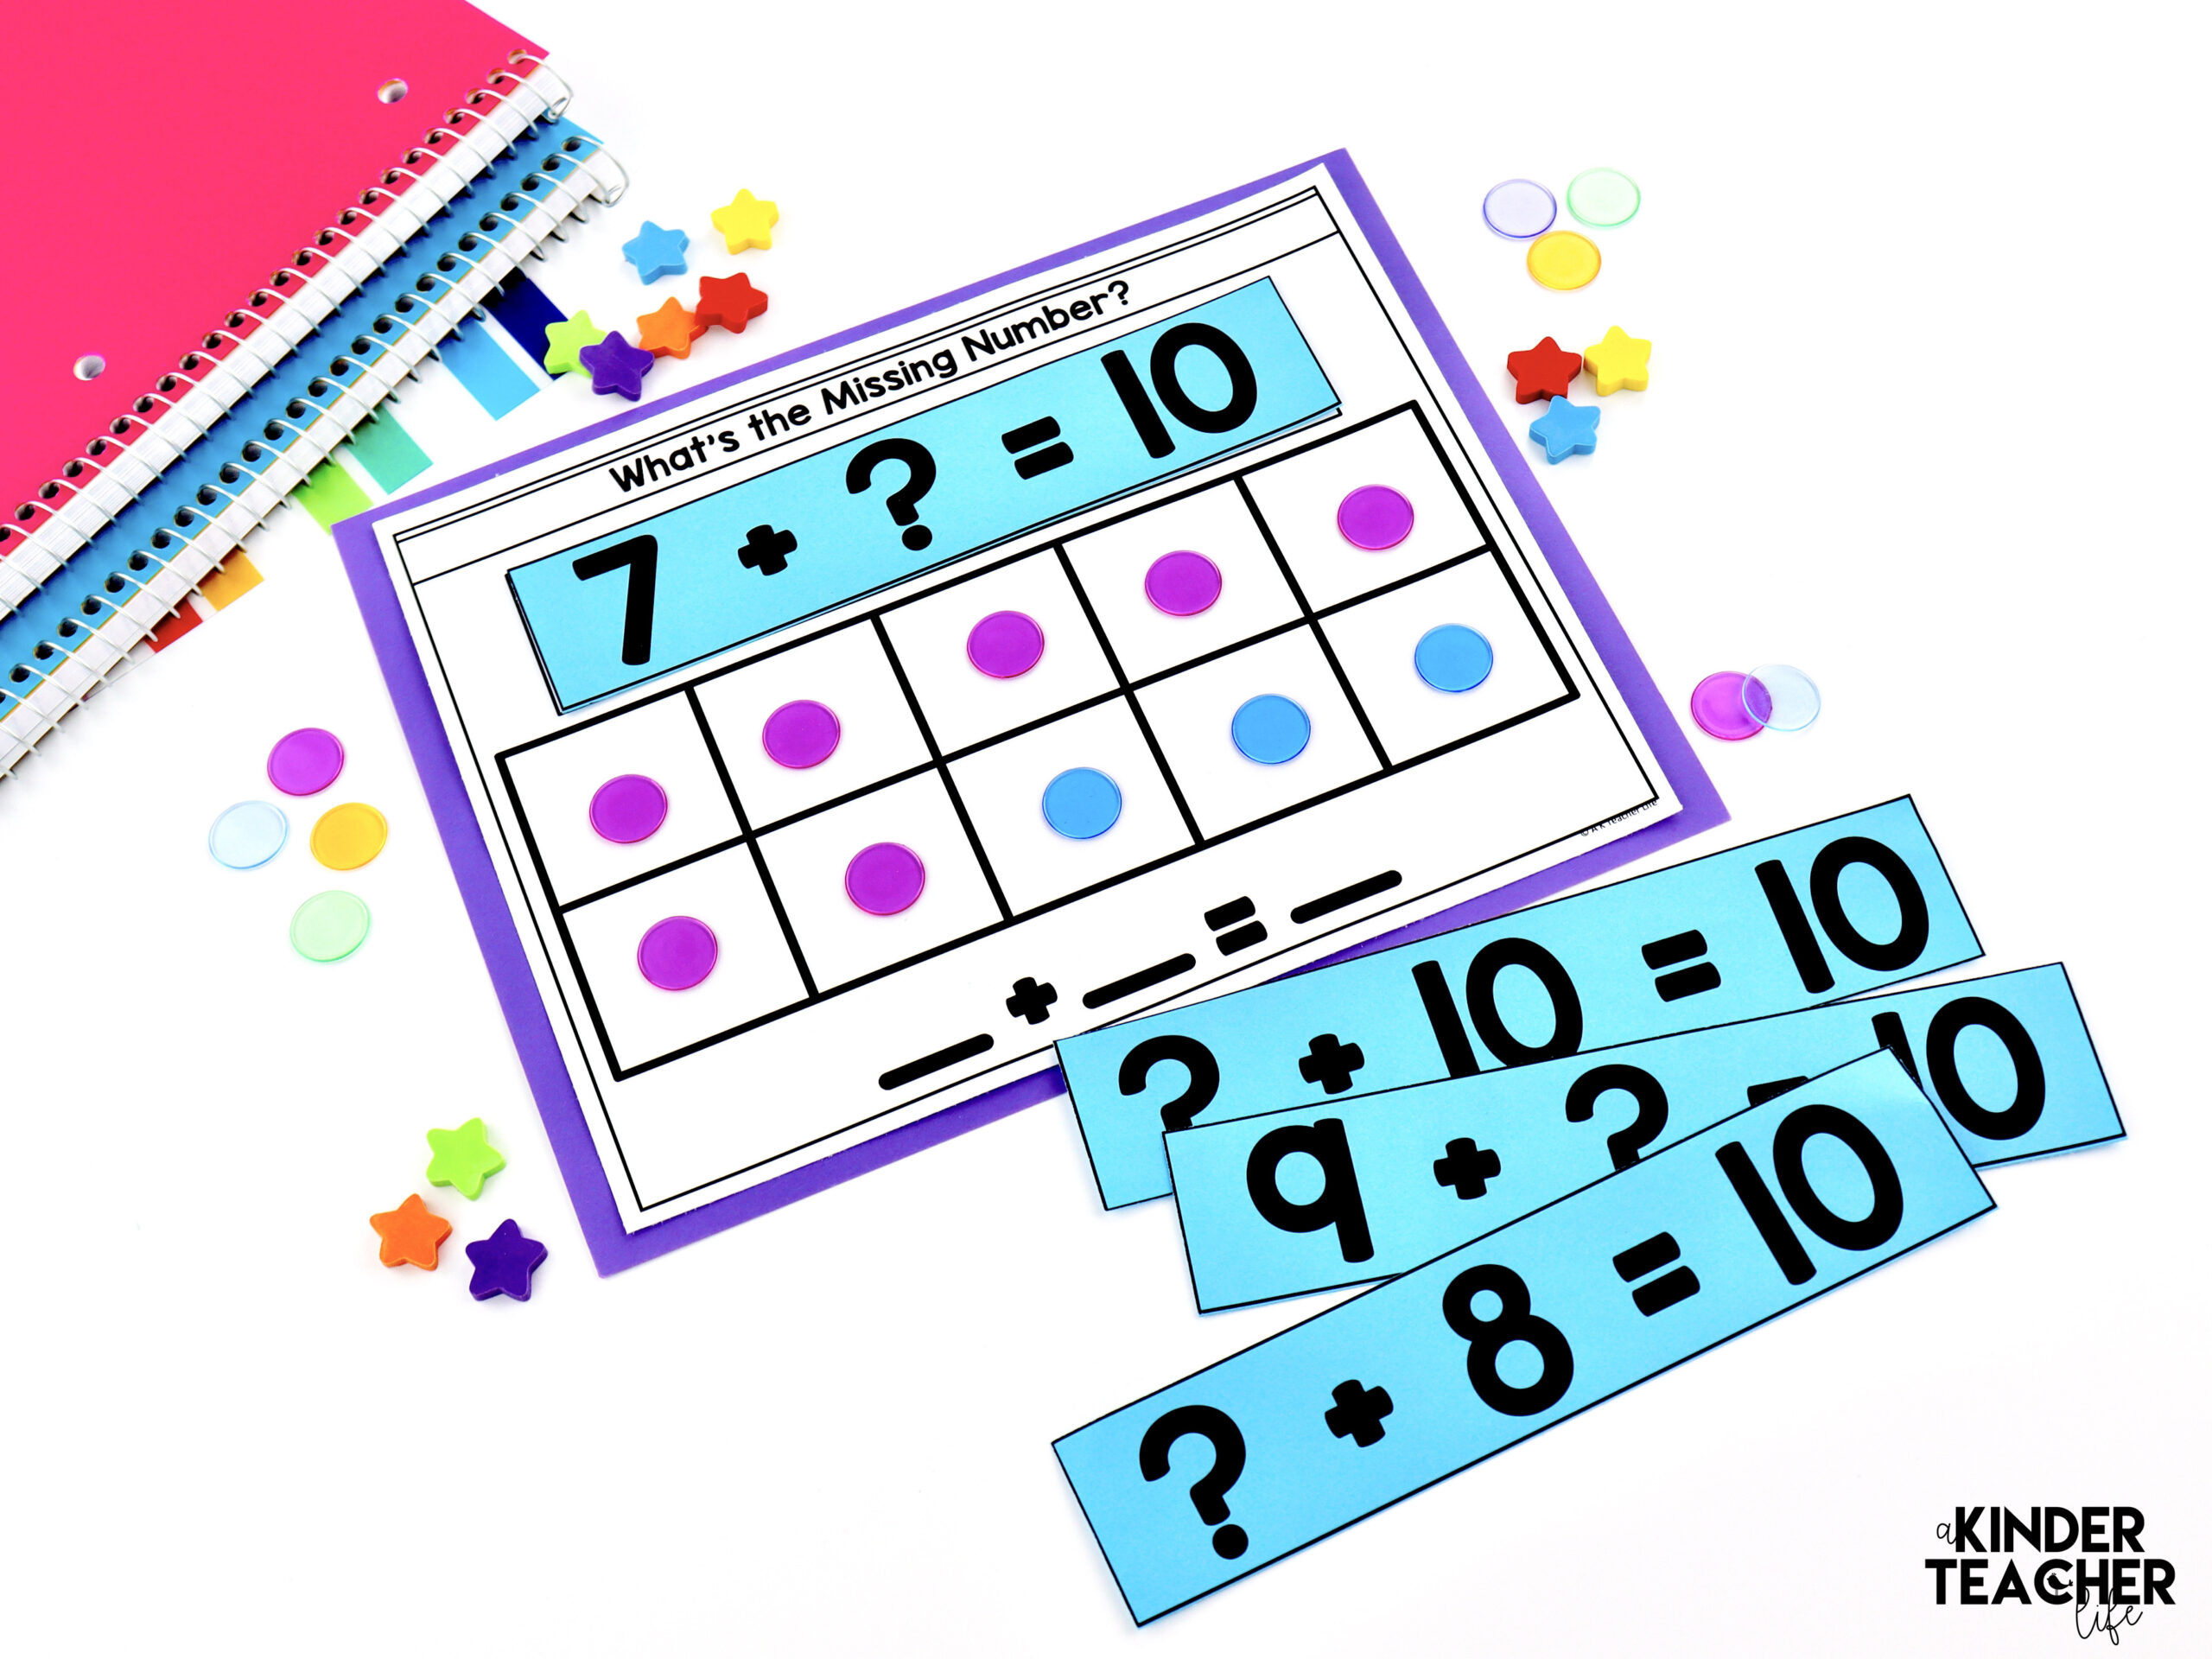 STRATEGIES TO TEACH COMPOSING AND DECOMPOSING NUMBERS